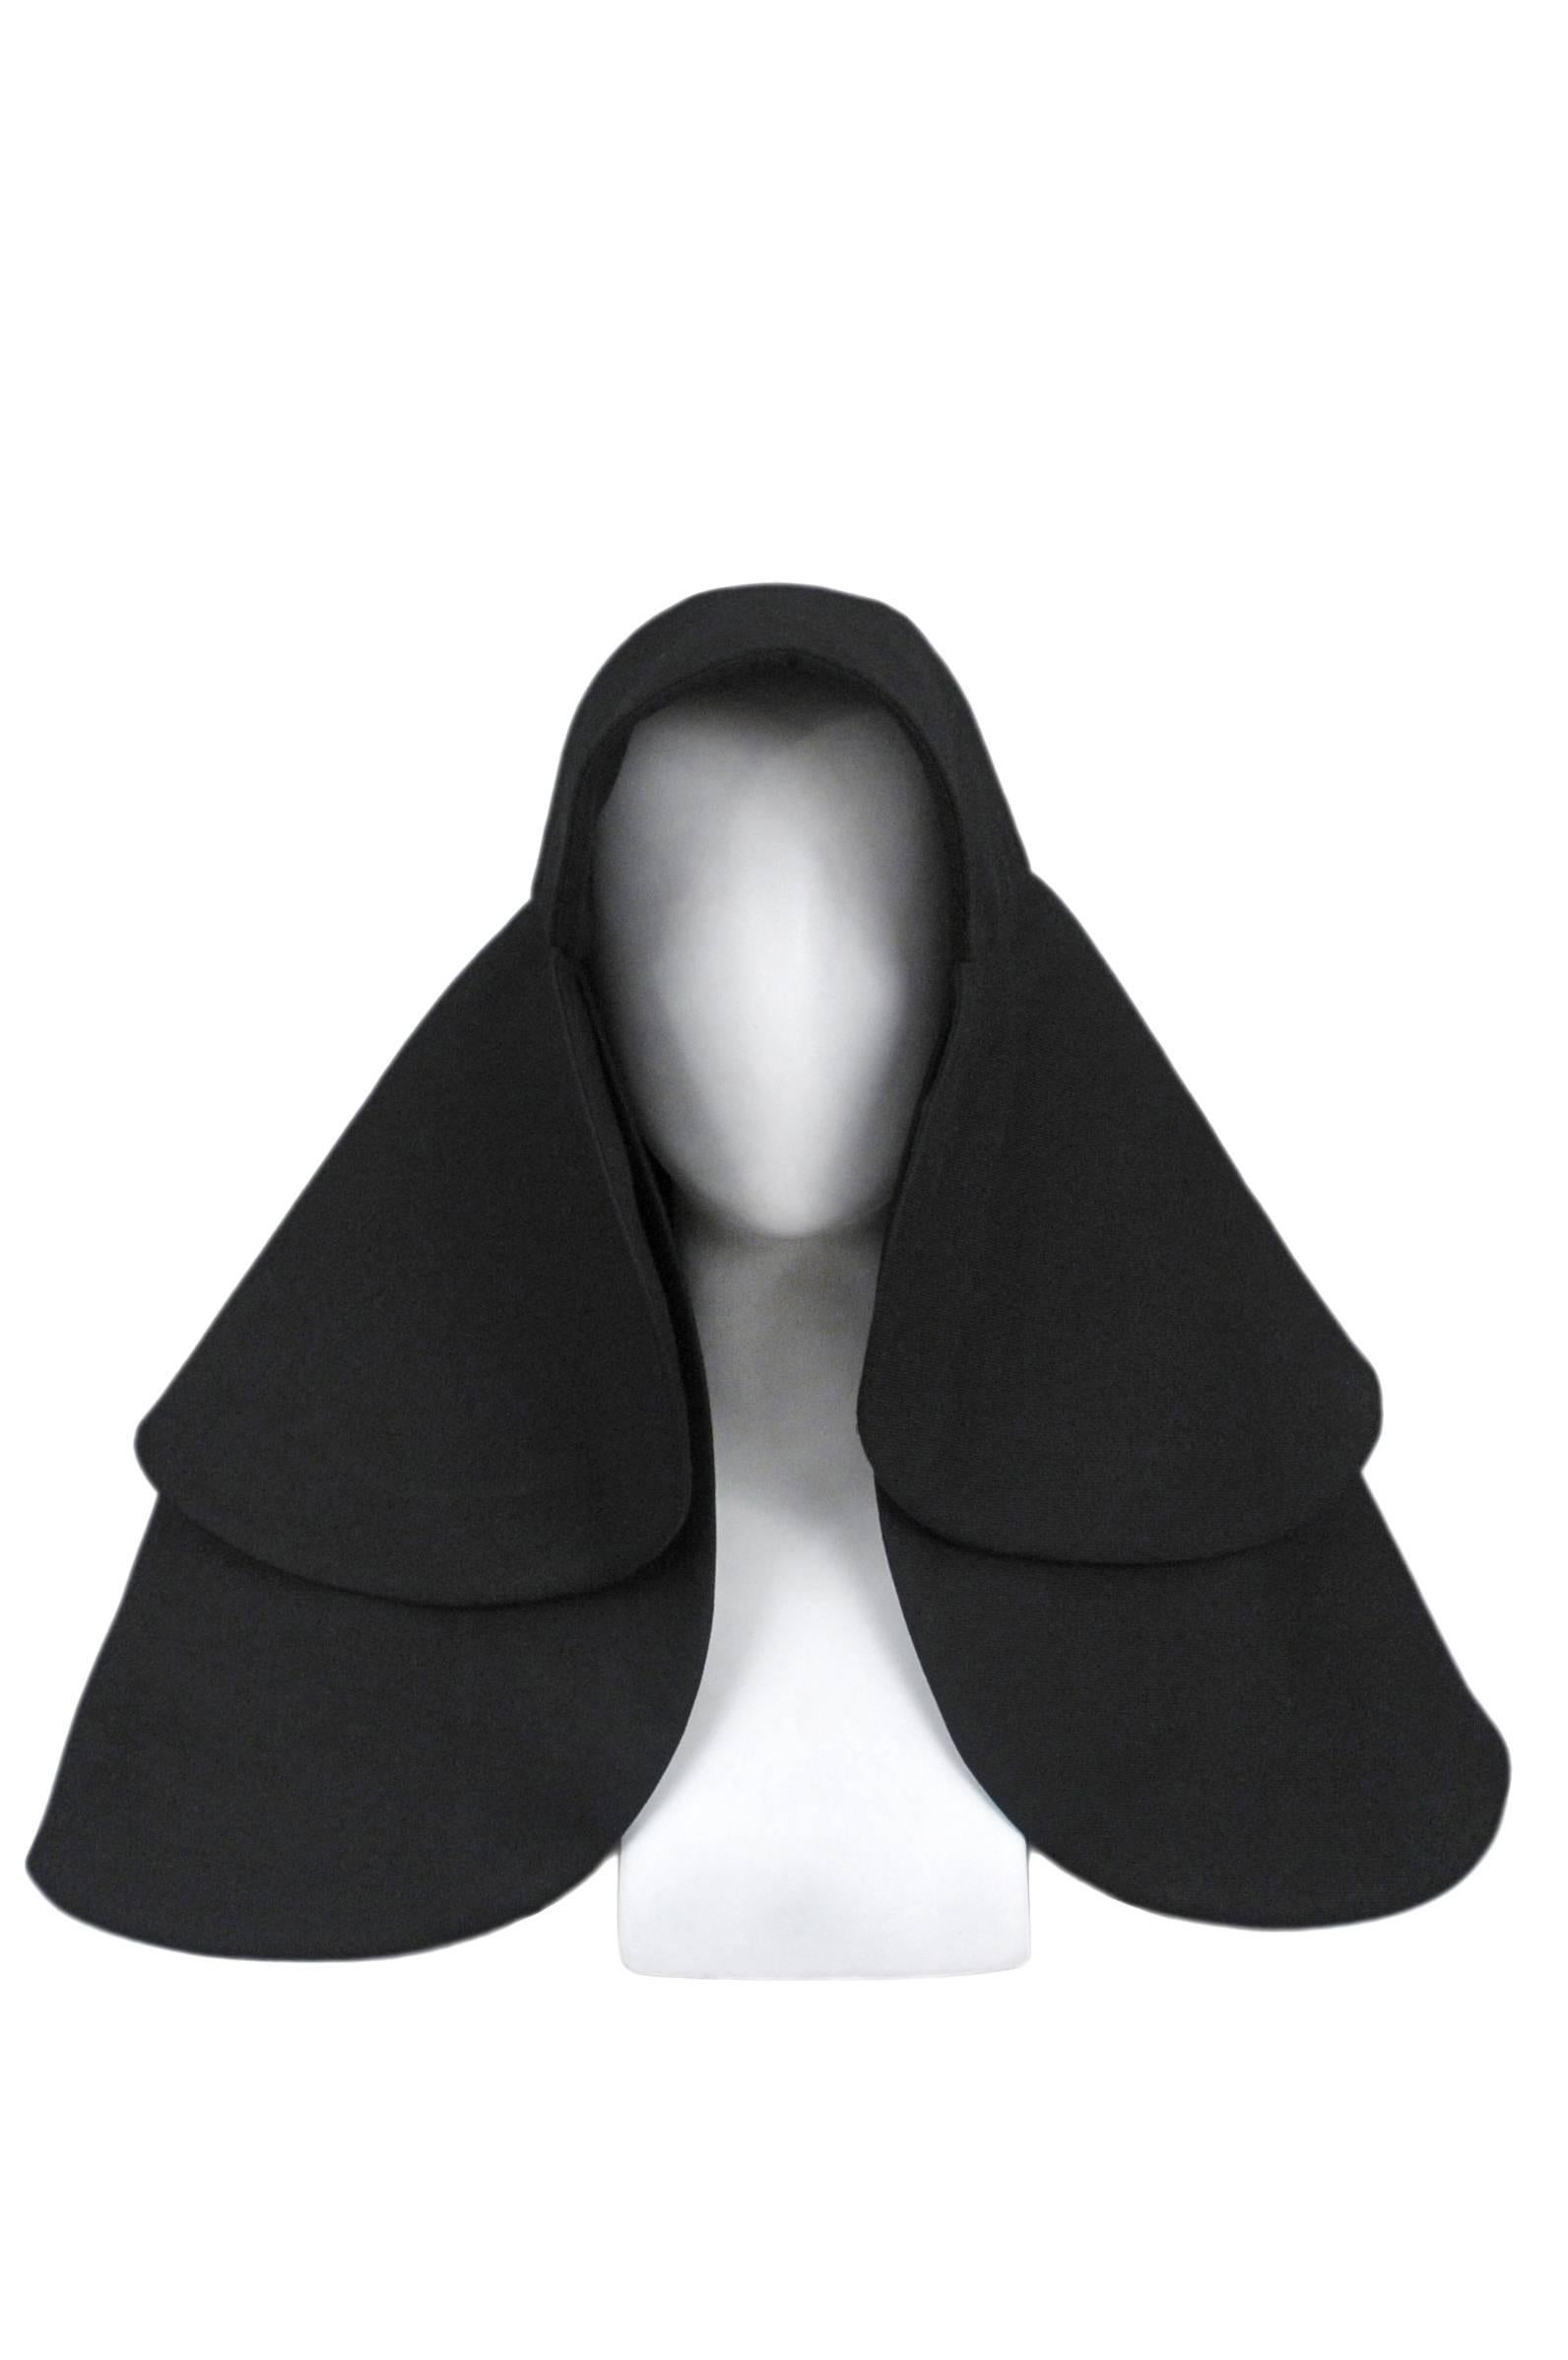 Stefano Pilati for Yves Saint Laurent iconic black nun hat. Circa 2010.
Please inquire for additional images.